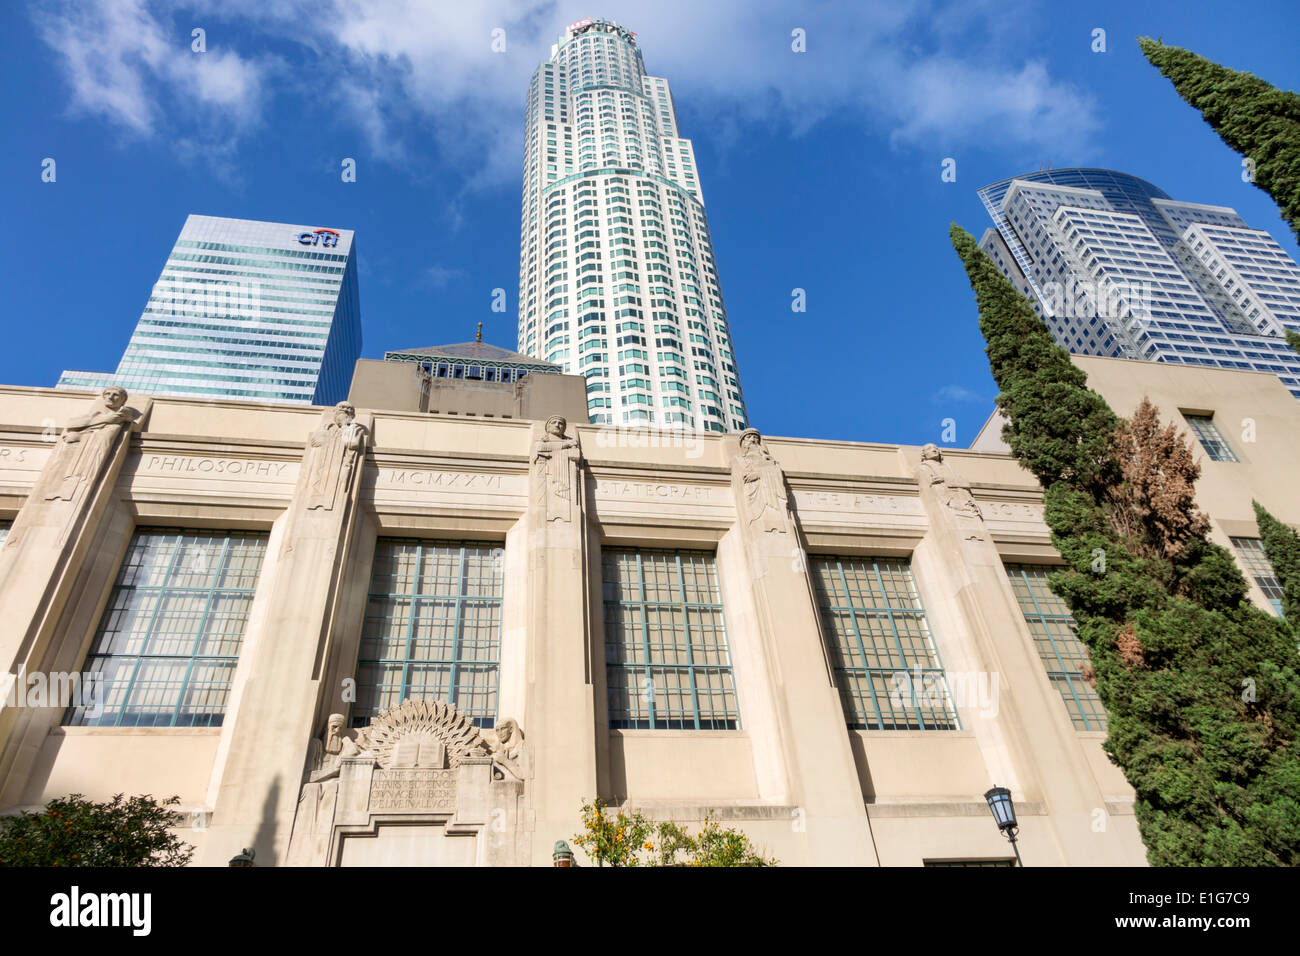 Los Angeles California, Downtown, skyline della città, Los Angeles Public Library, Richard J. Riordan Central Library, Goodhue Building, 1926, South Sideantary Egy Foto Stock